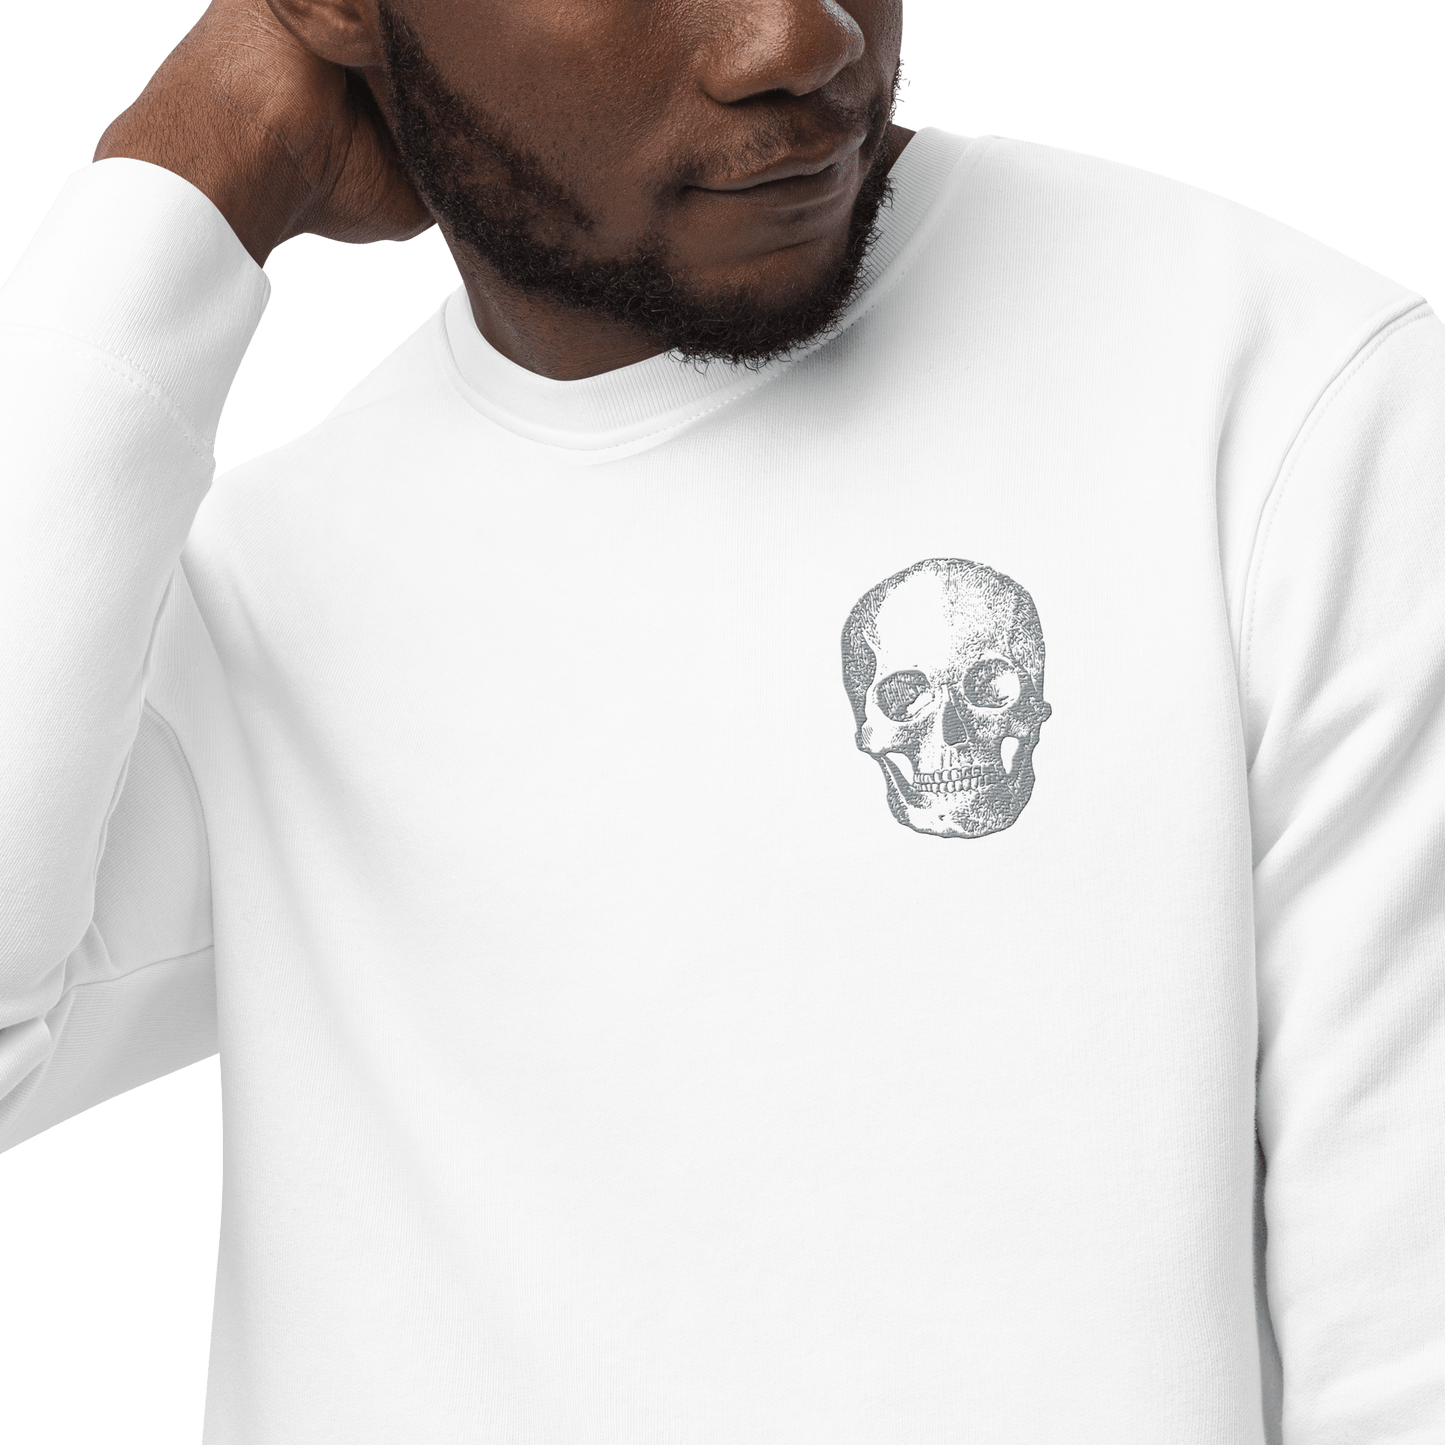 Local Summer Collective So Dead Embroidered Unisex Eco Sweatshirt